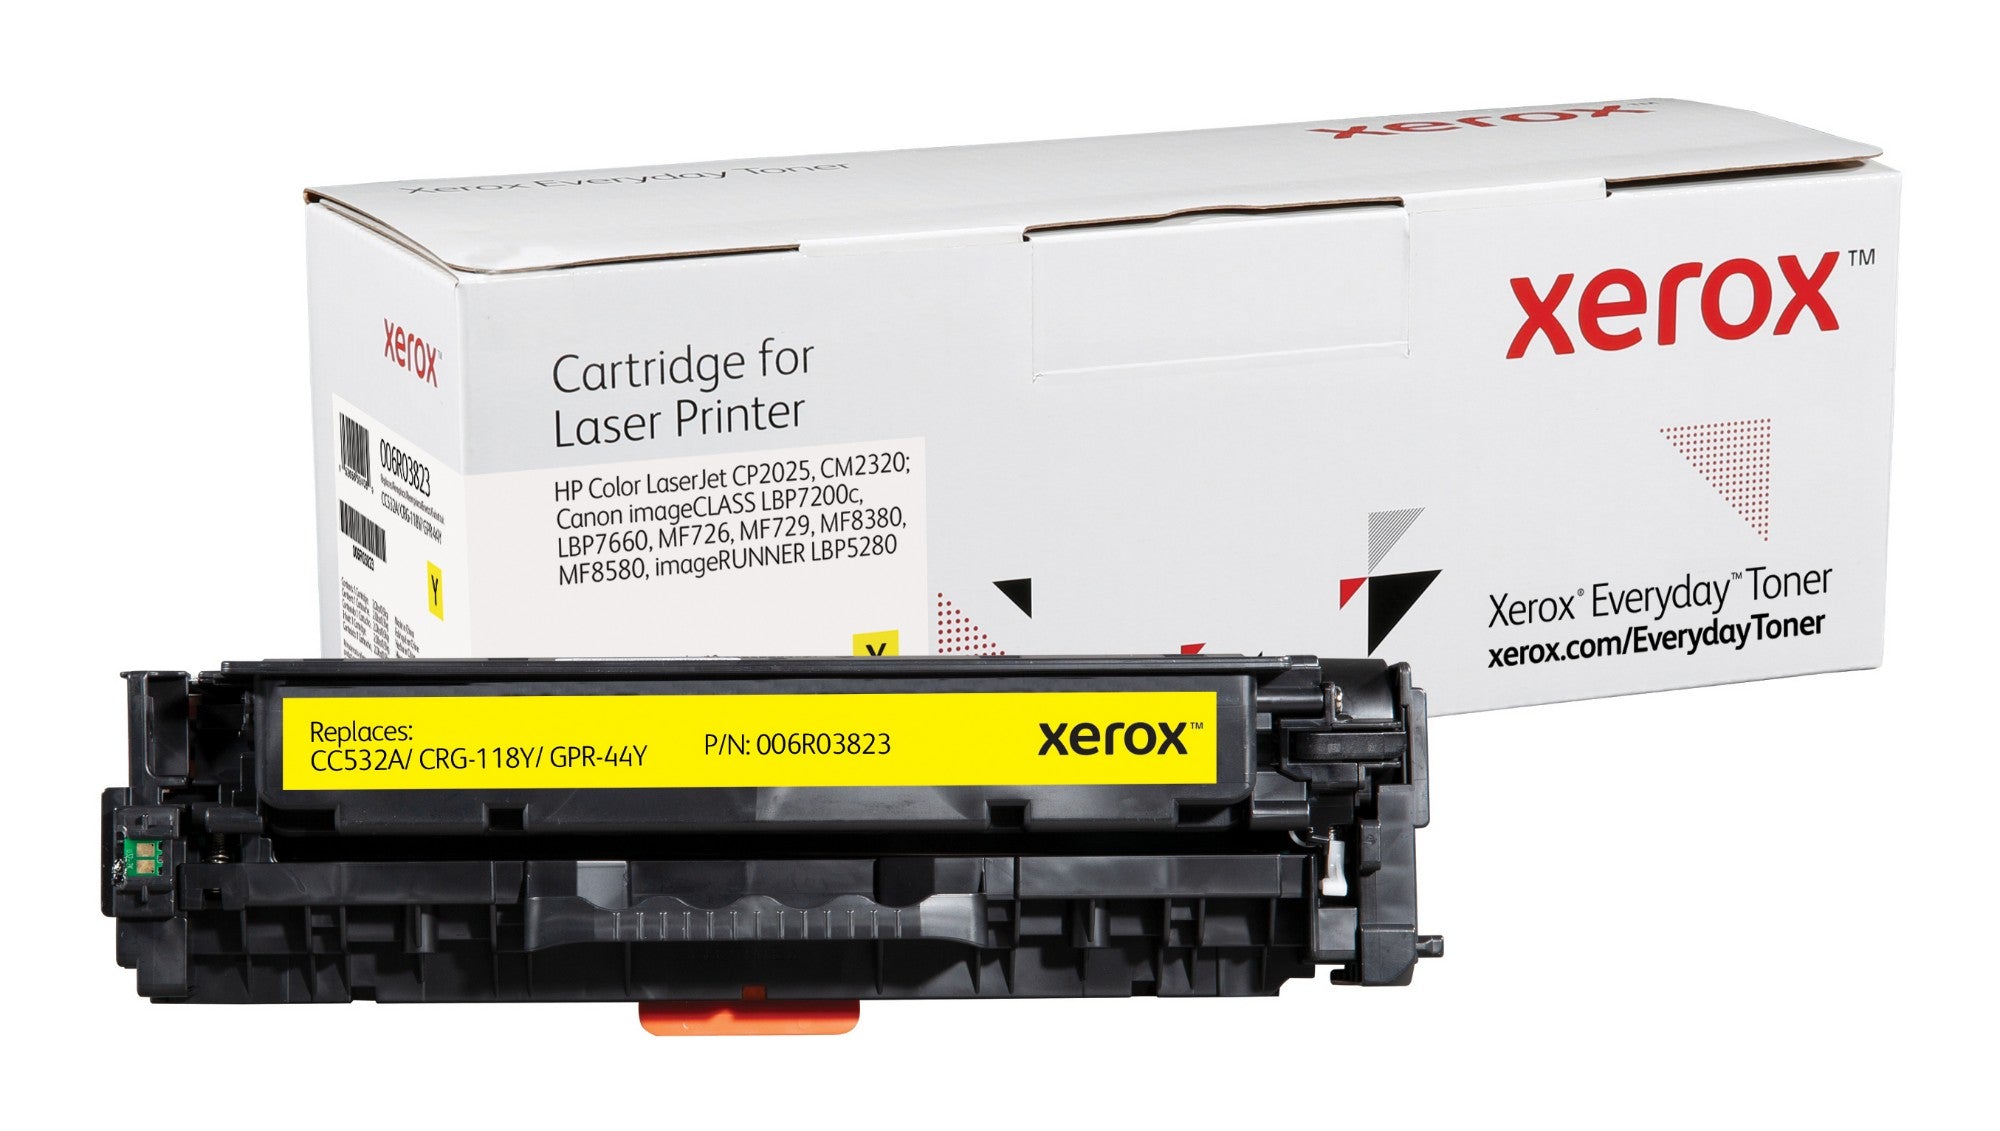 Xerox 006R03823 Toner cartridge yellow, 2.8K pages (replaces Canon 718Y HP 304A/CC532A) for Canon LBP-7200/HP CLJ CP 2025